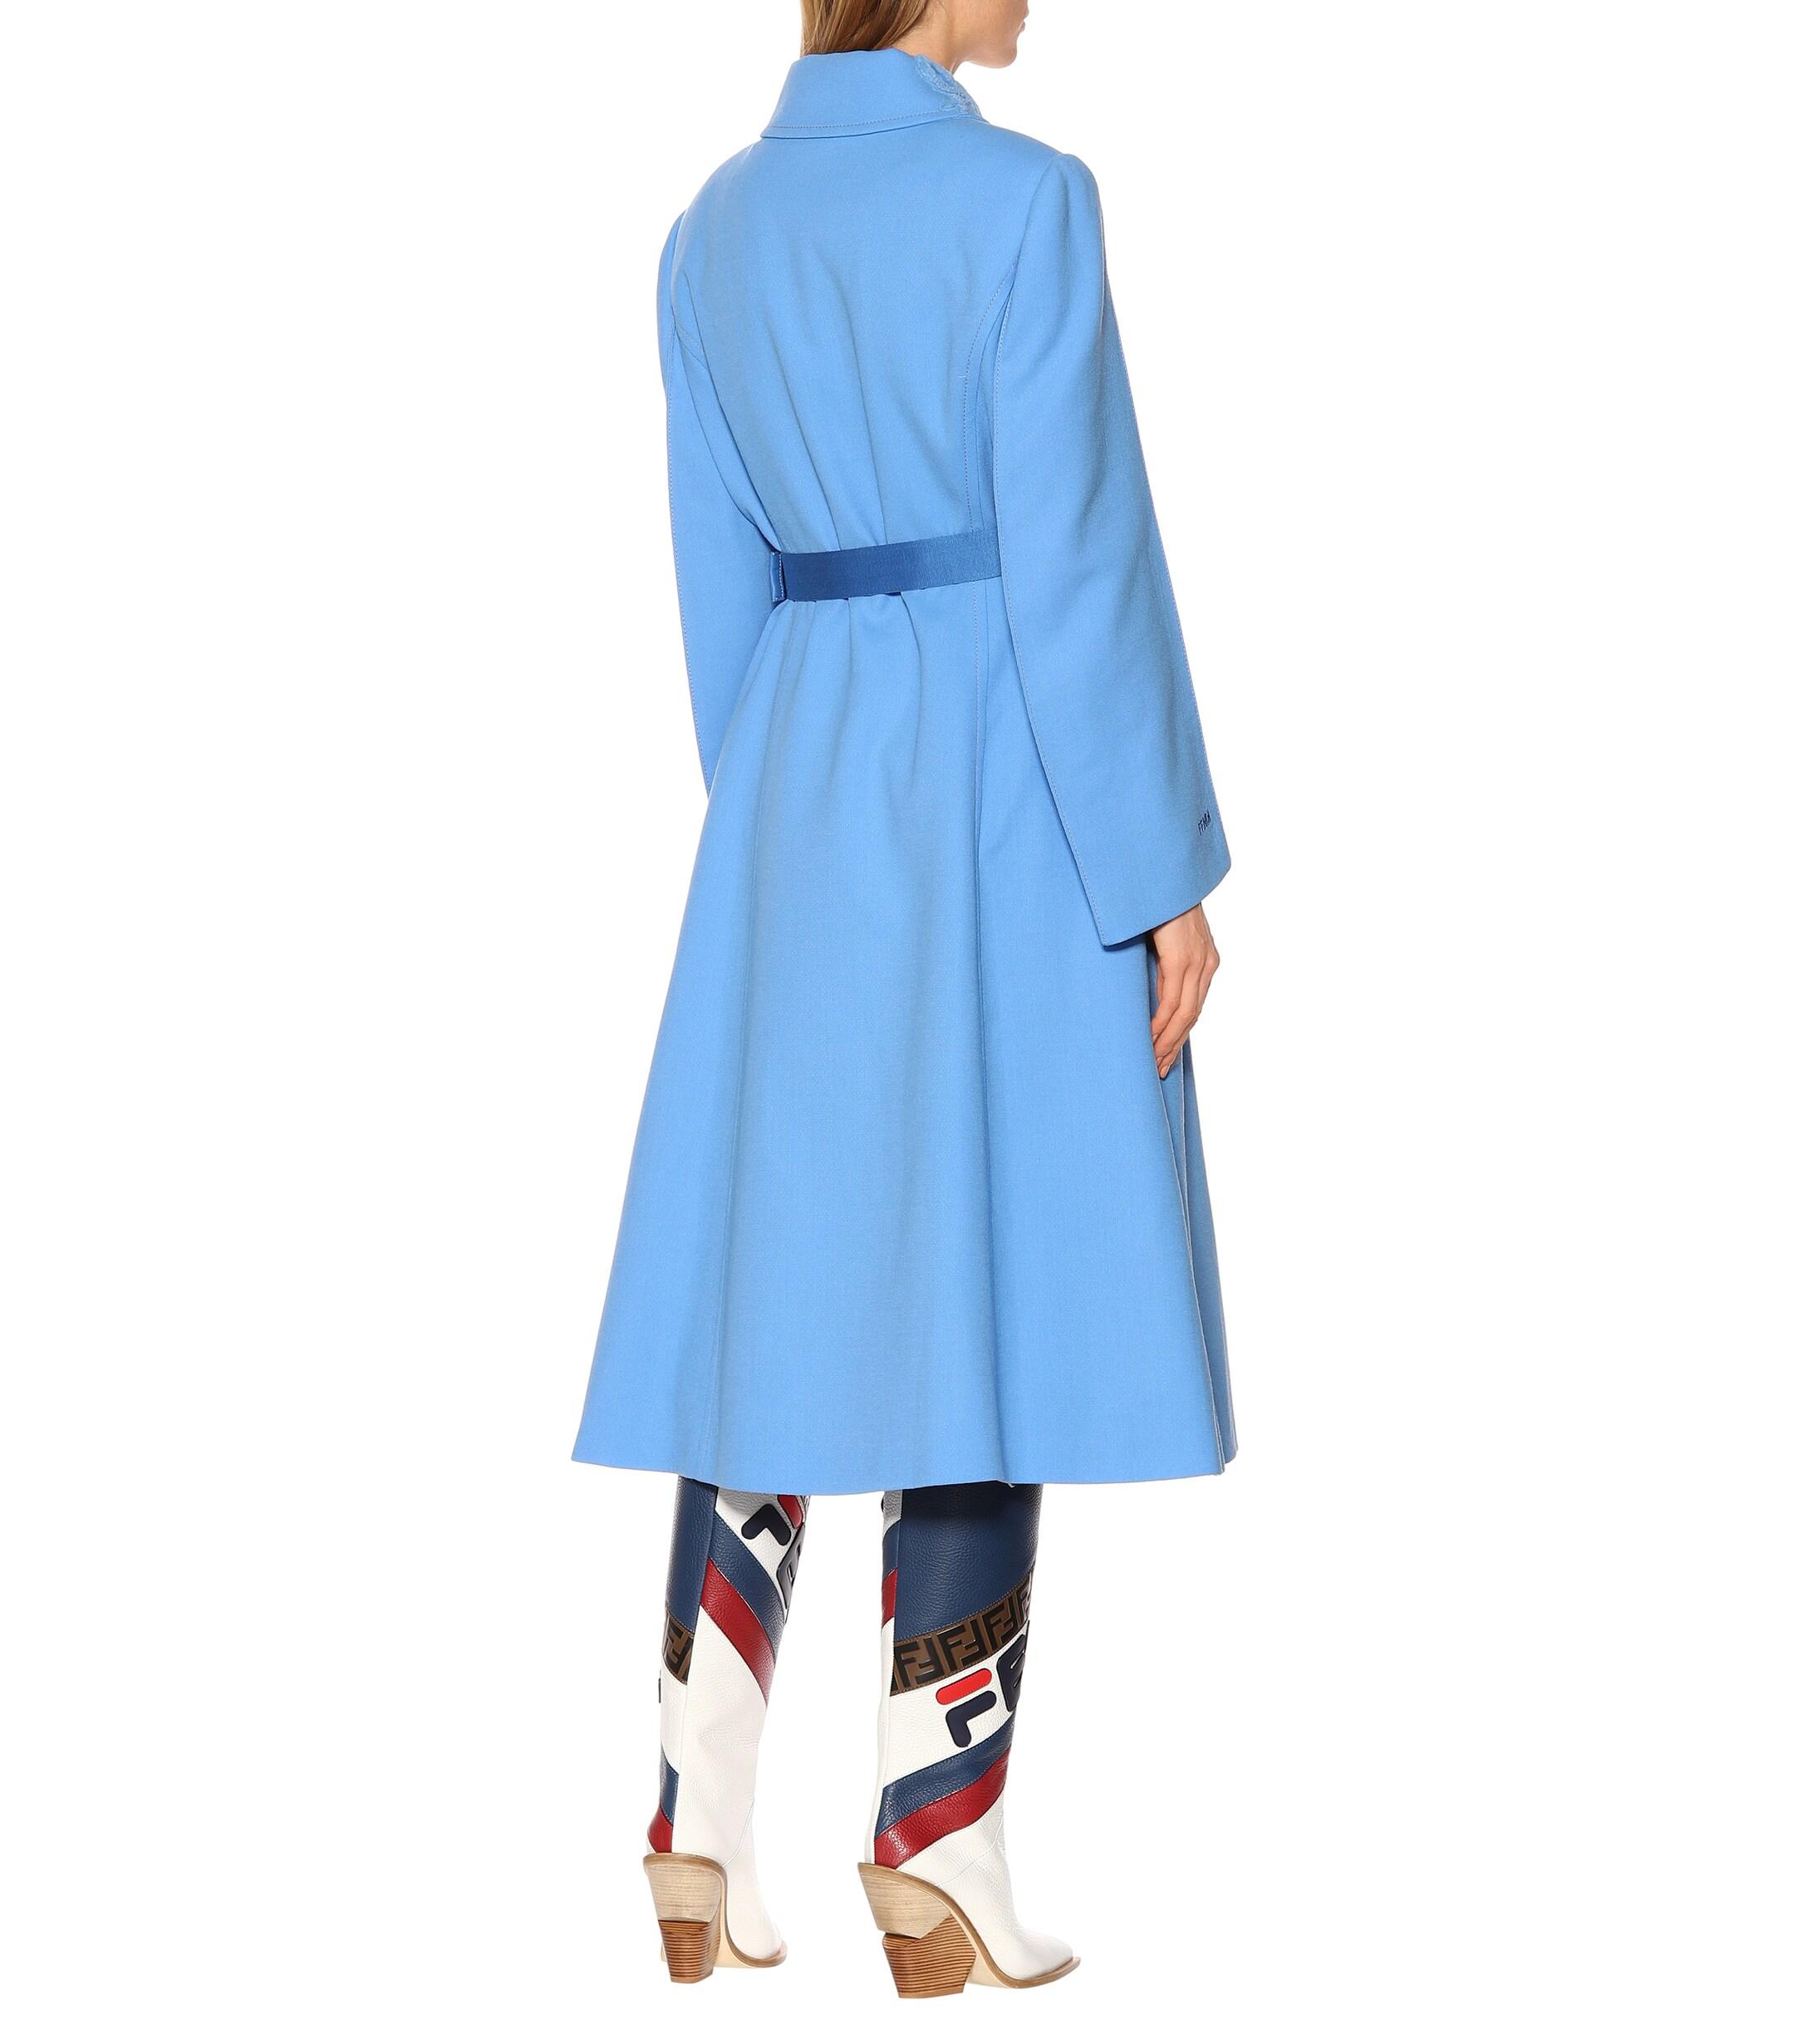 Fendi Wool And Fur Trench Coat in Blue - Lyst